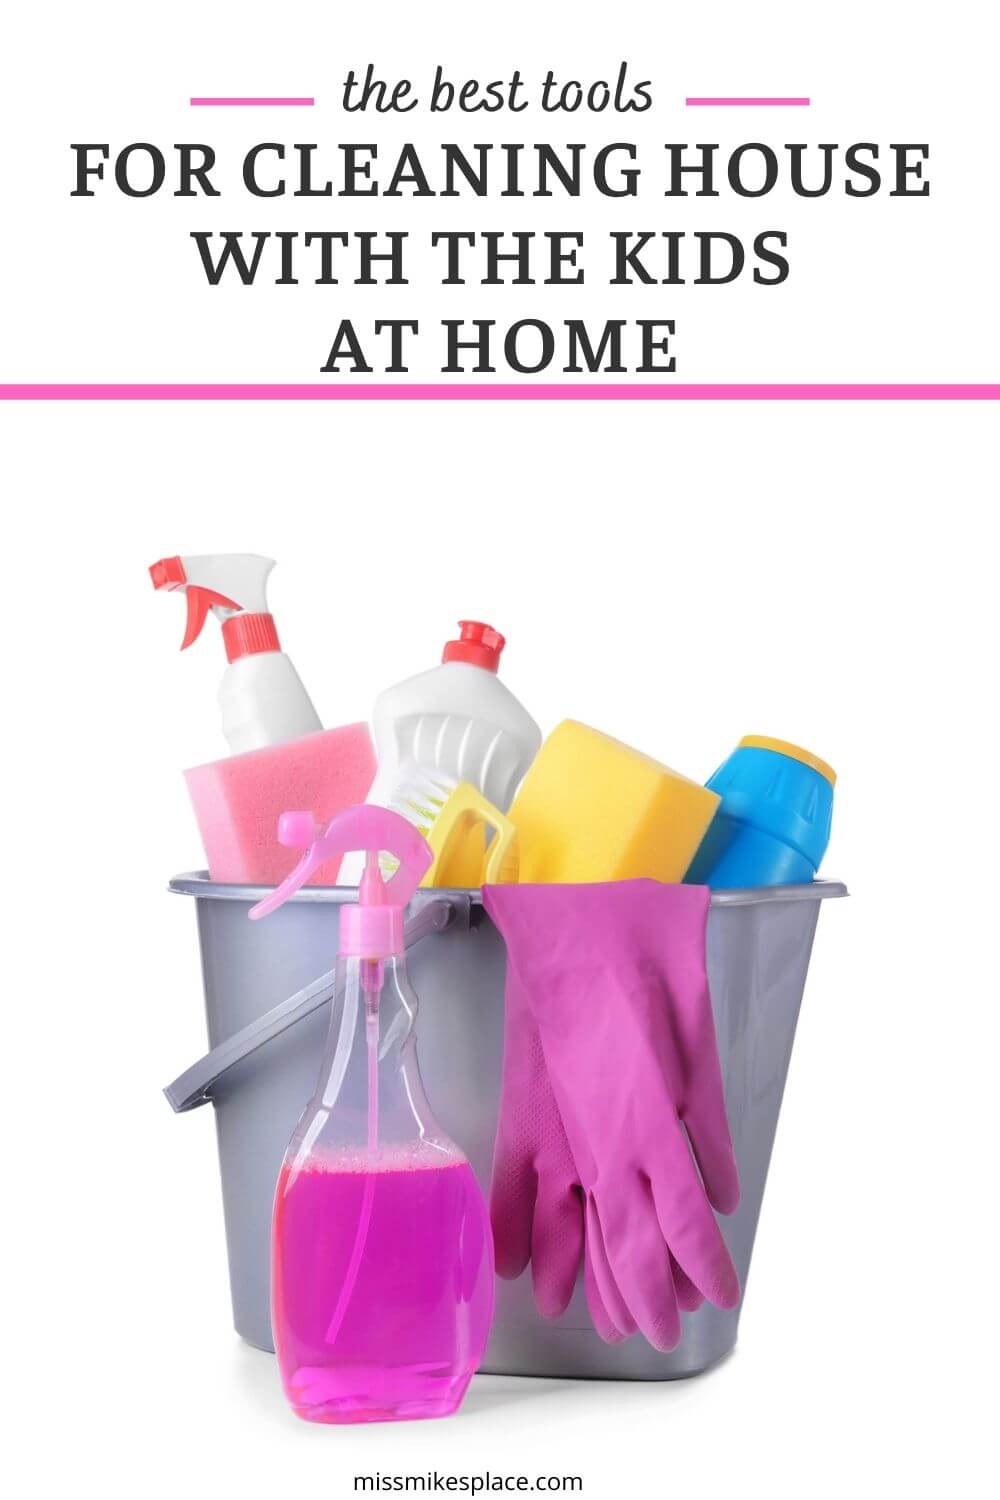 Store - The Ultimate Home Cleanup Tool